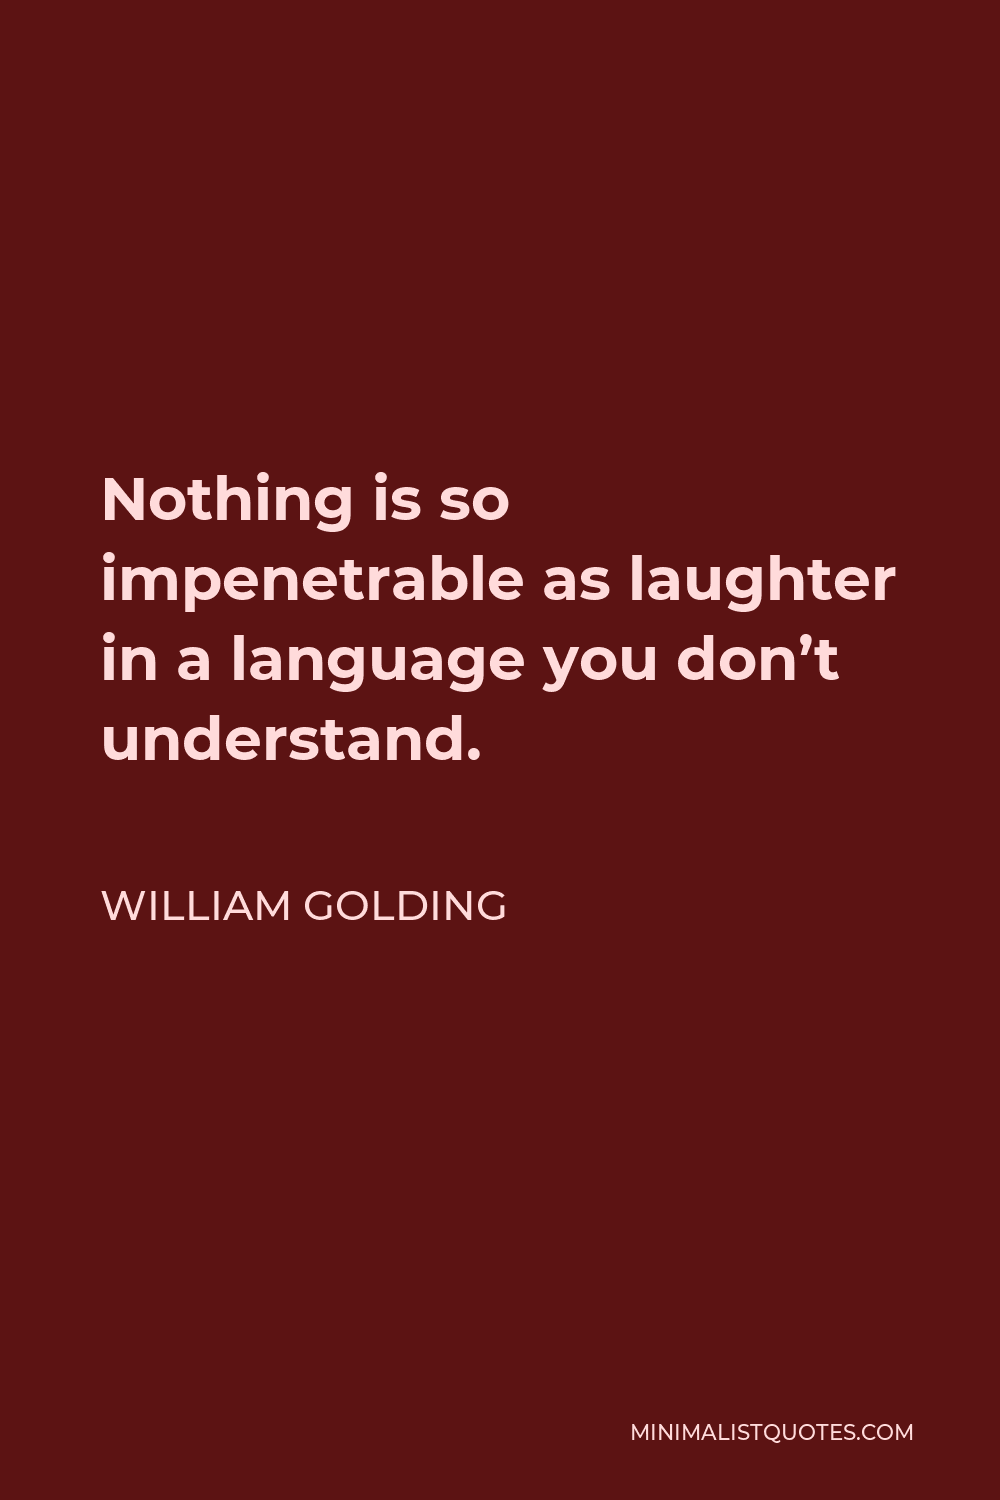 William Golding Quote - Nothing is so impenetrable as laughter in a language you don’t understand.